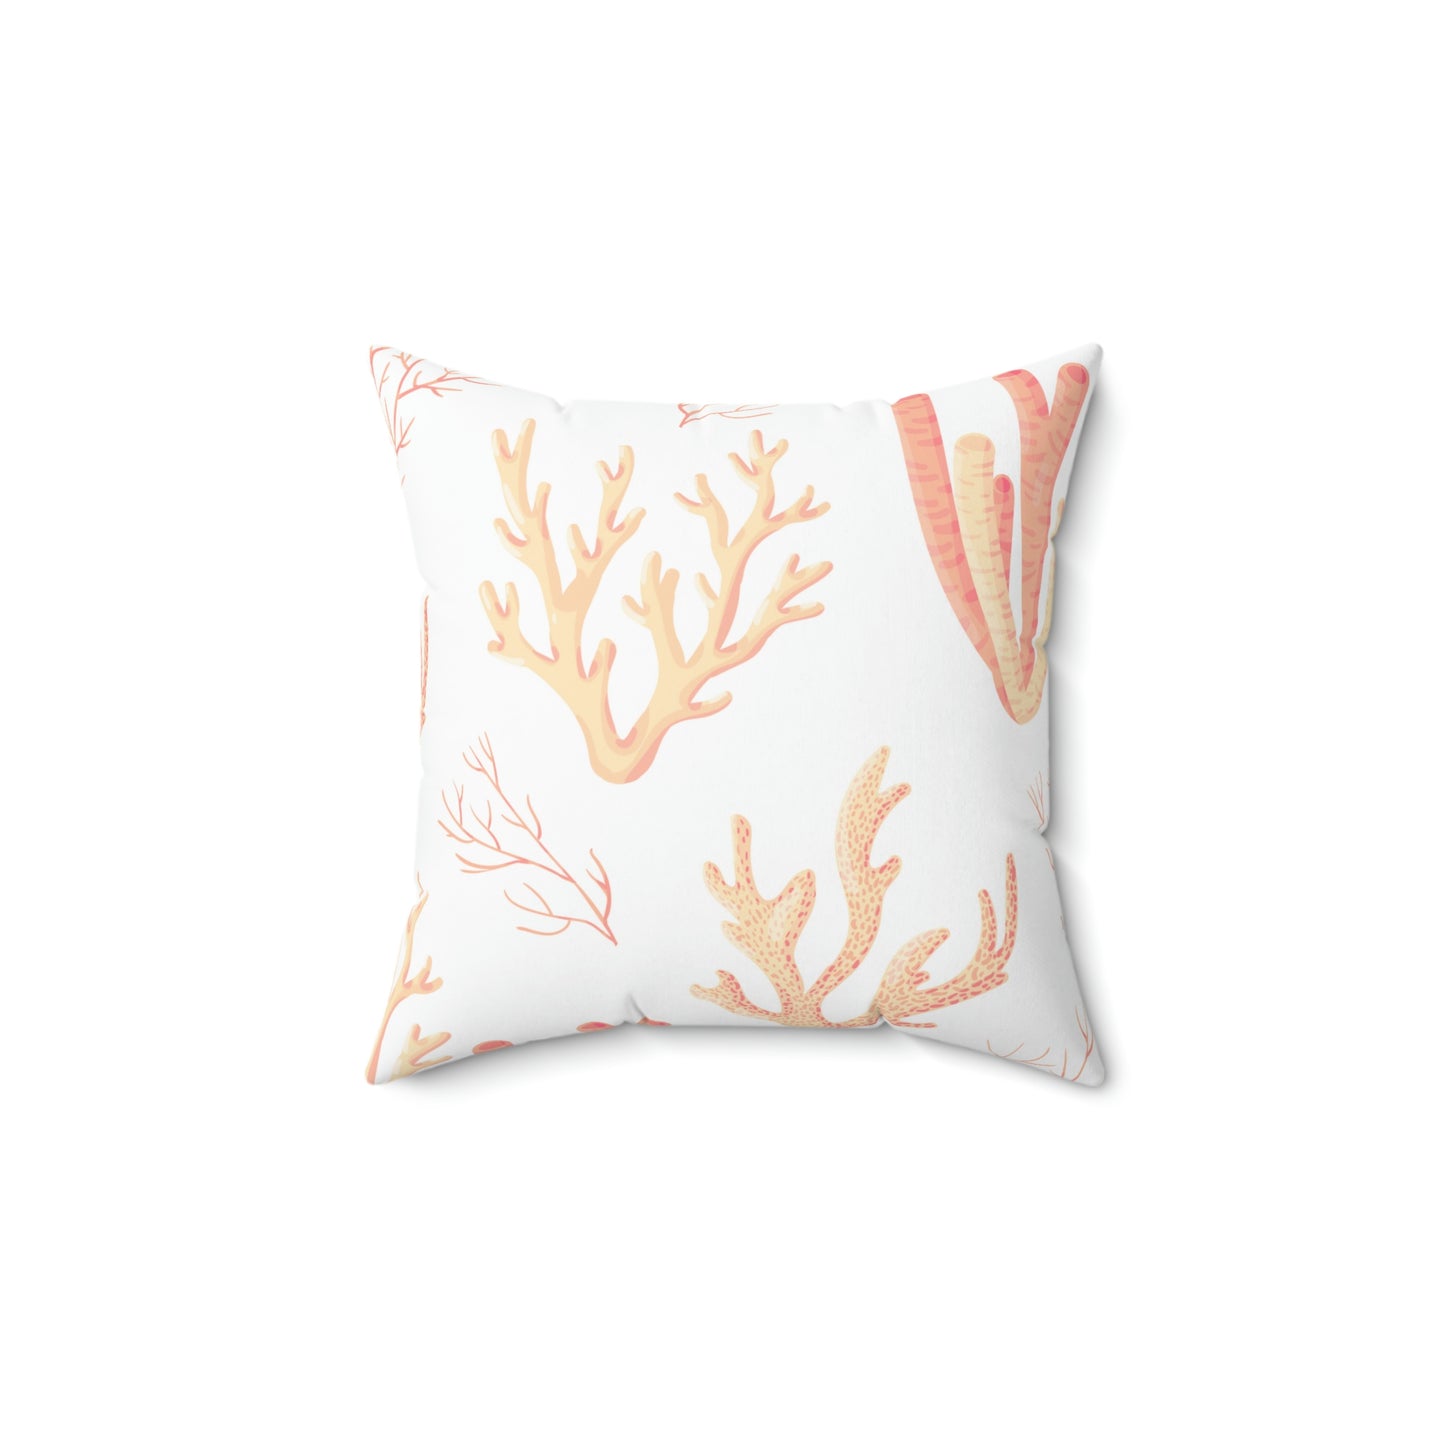 Coral Fantasy Pillow - Reef of Clowns